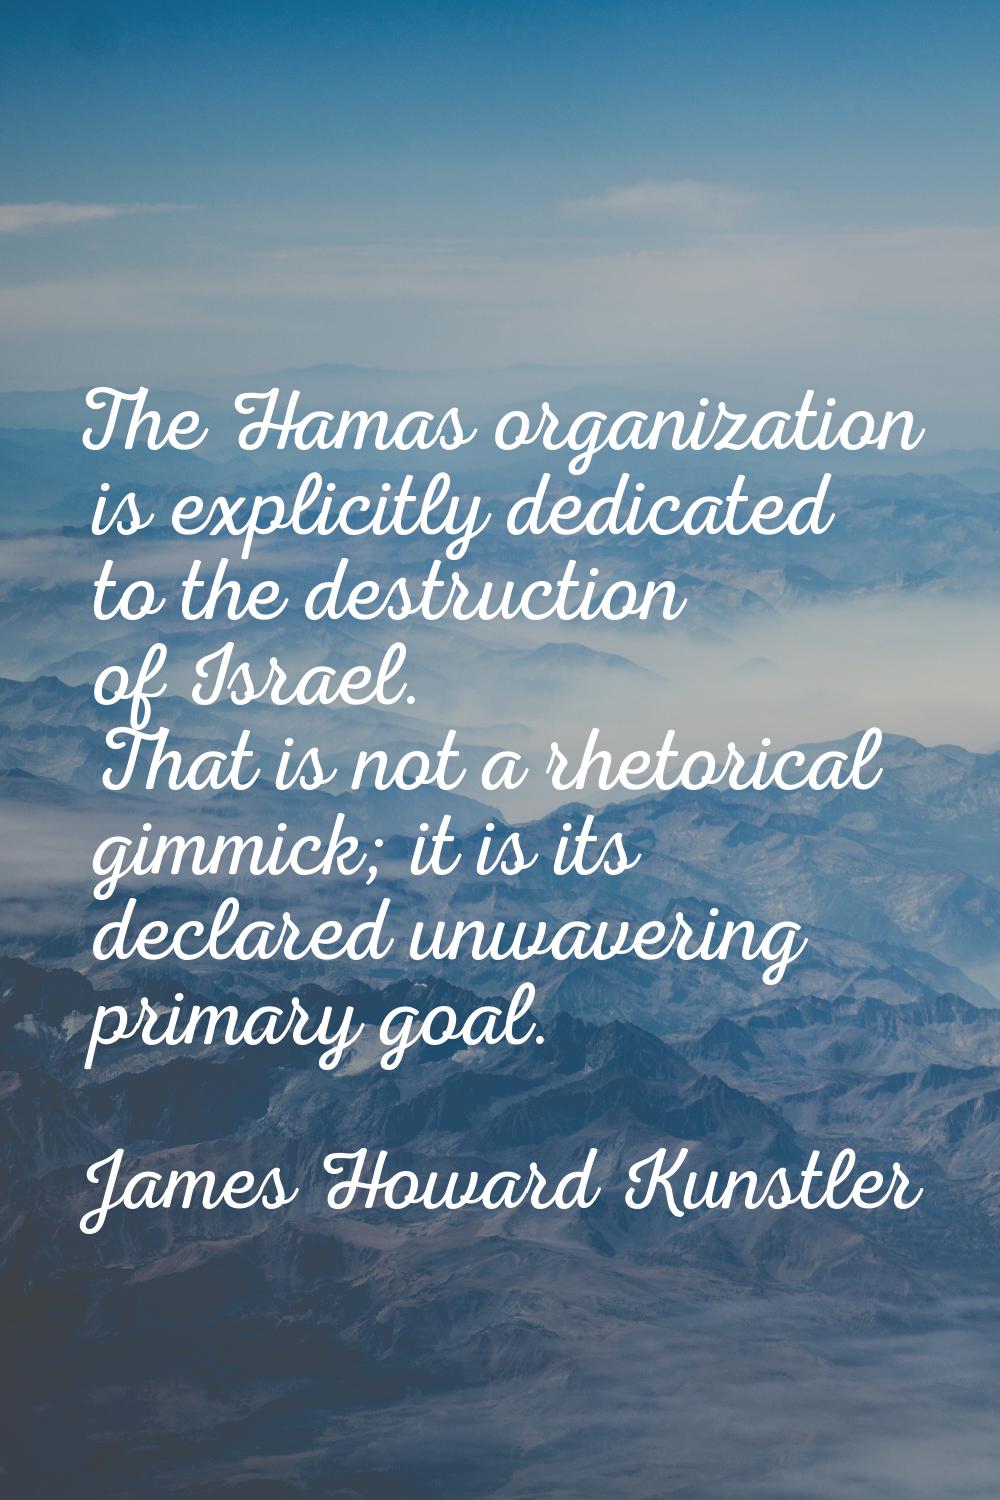 The Hamas organization is explicitly dedicated to the destruction of Israel. That is not a rhetoric